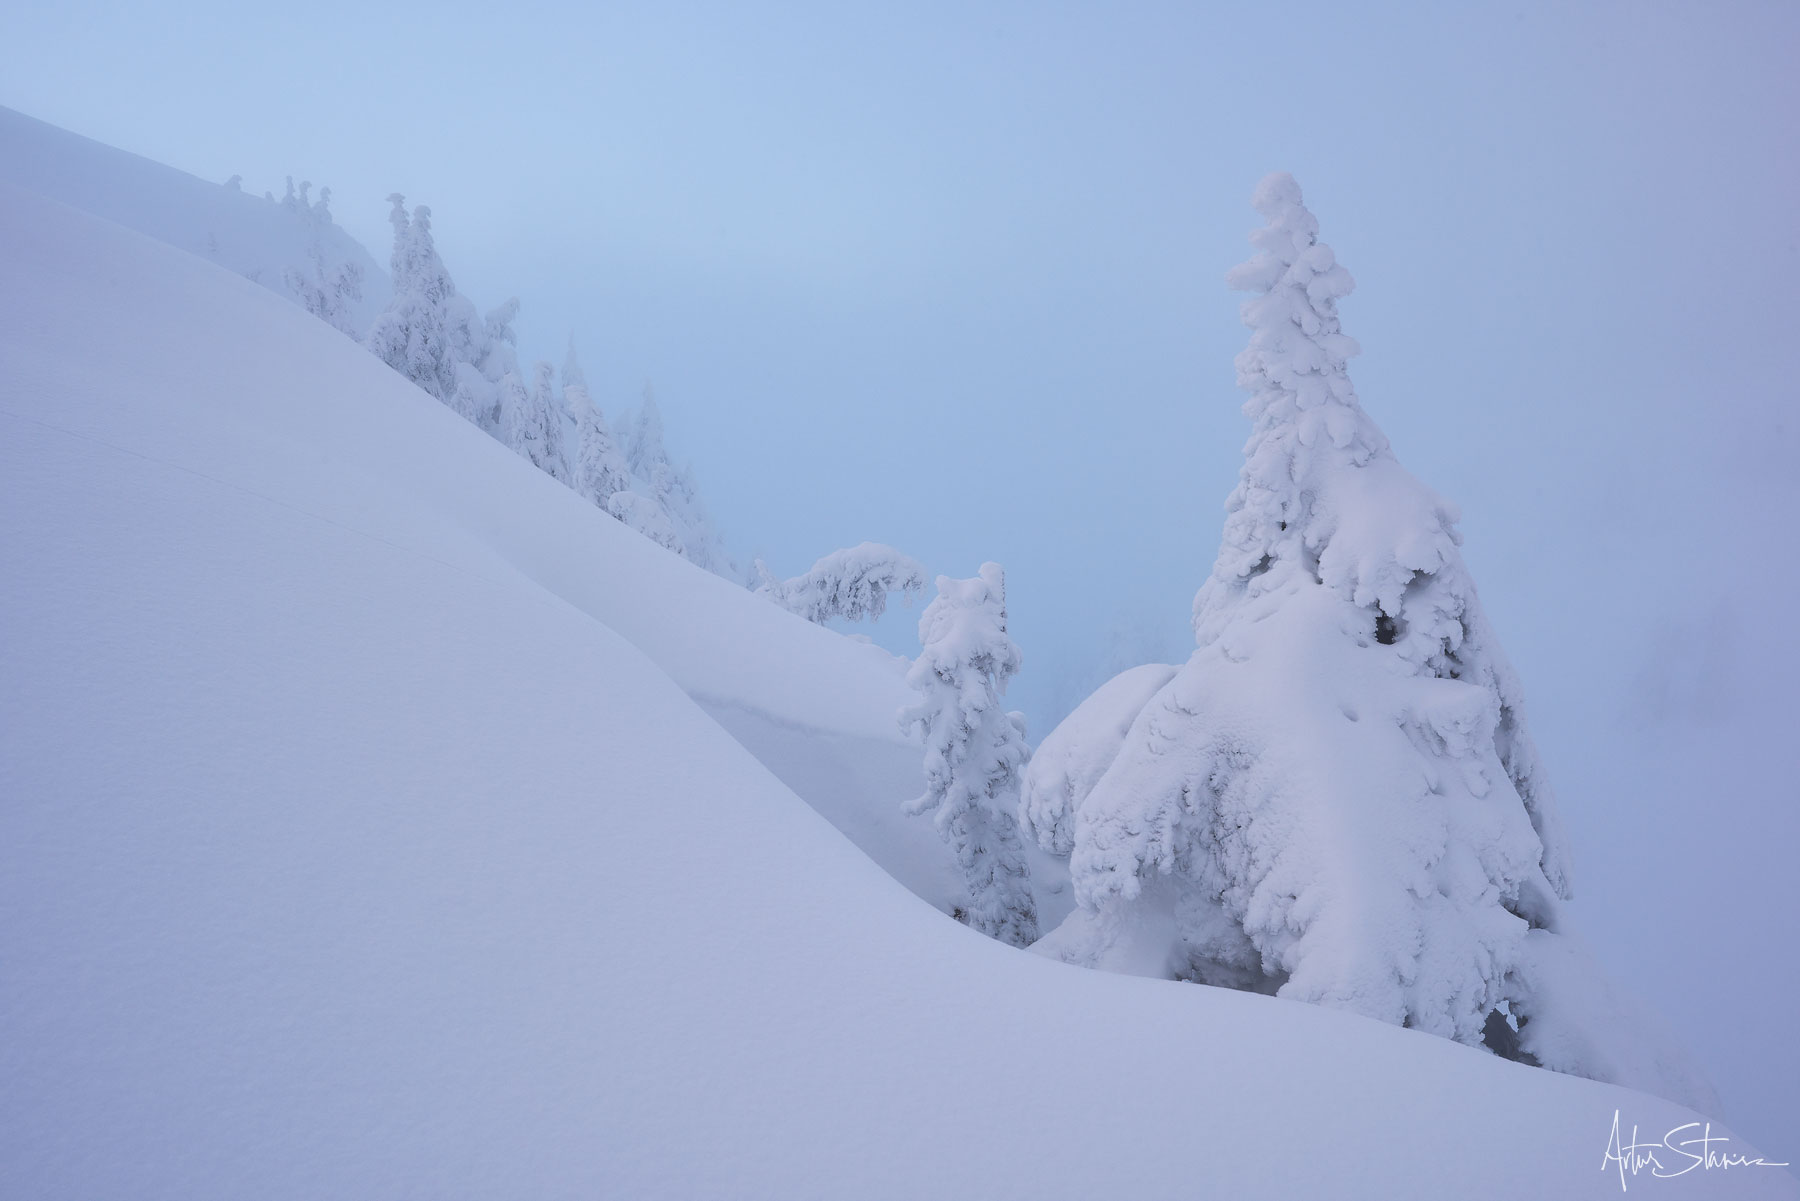 Beautiful trees grow on the edge of a cliff covered with fresh snow.